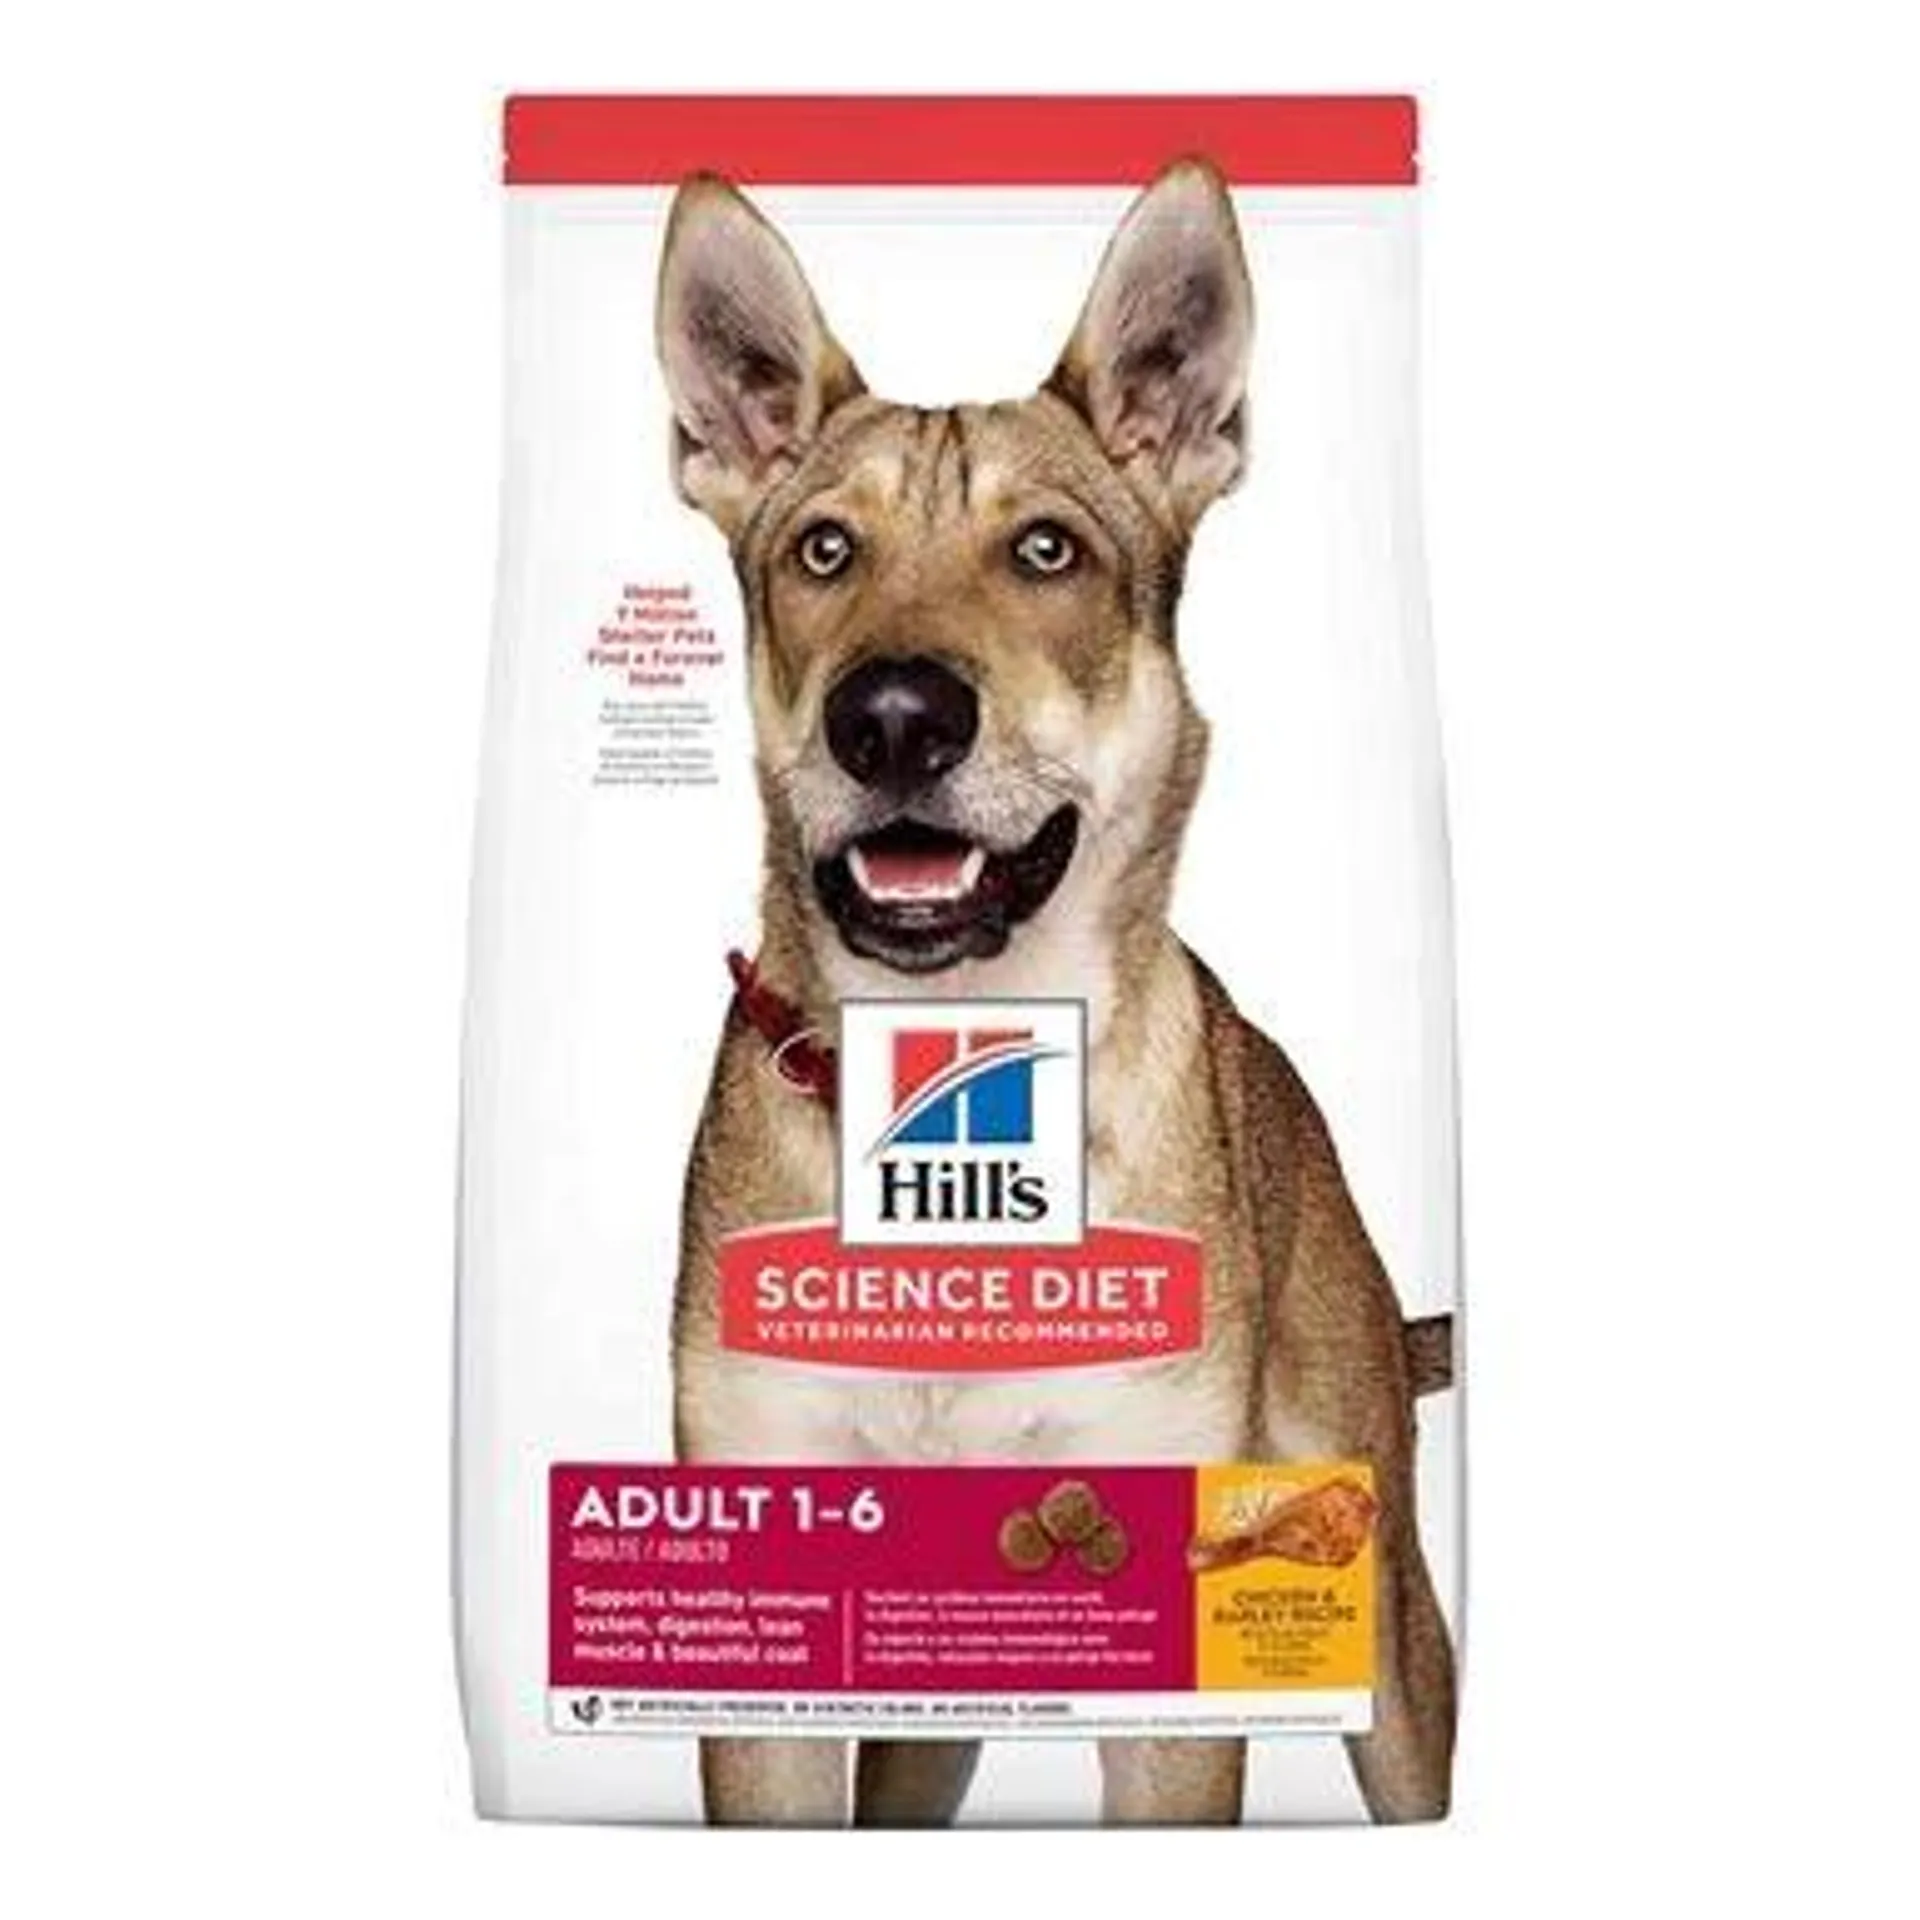 Hill's Science Diet Adult Dry Dog Food, Chicken & Barley Recipe, 35 Pounds